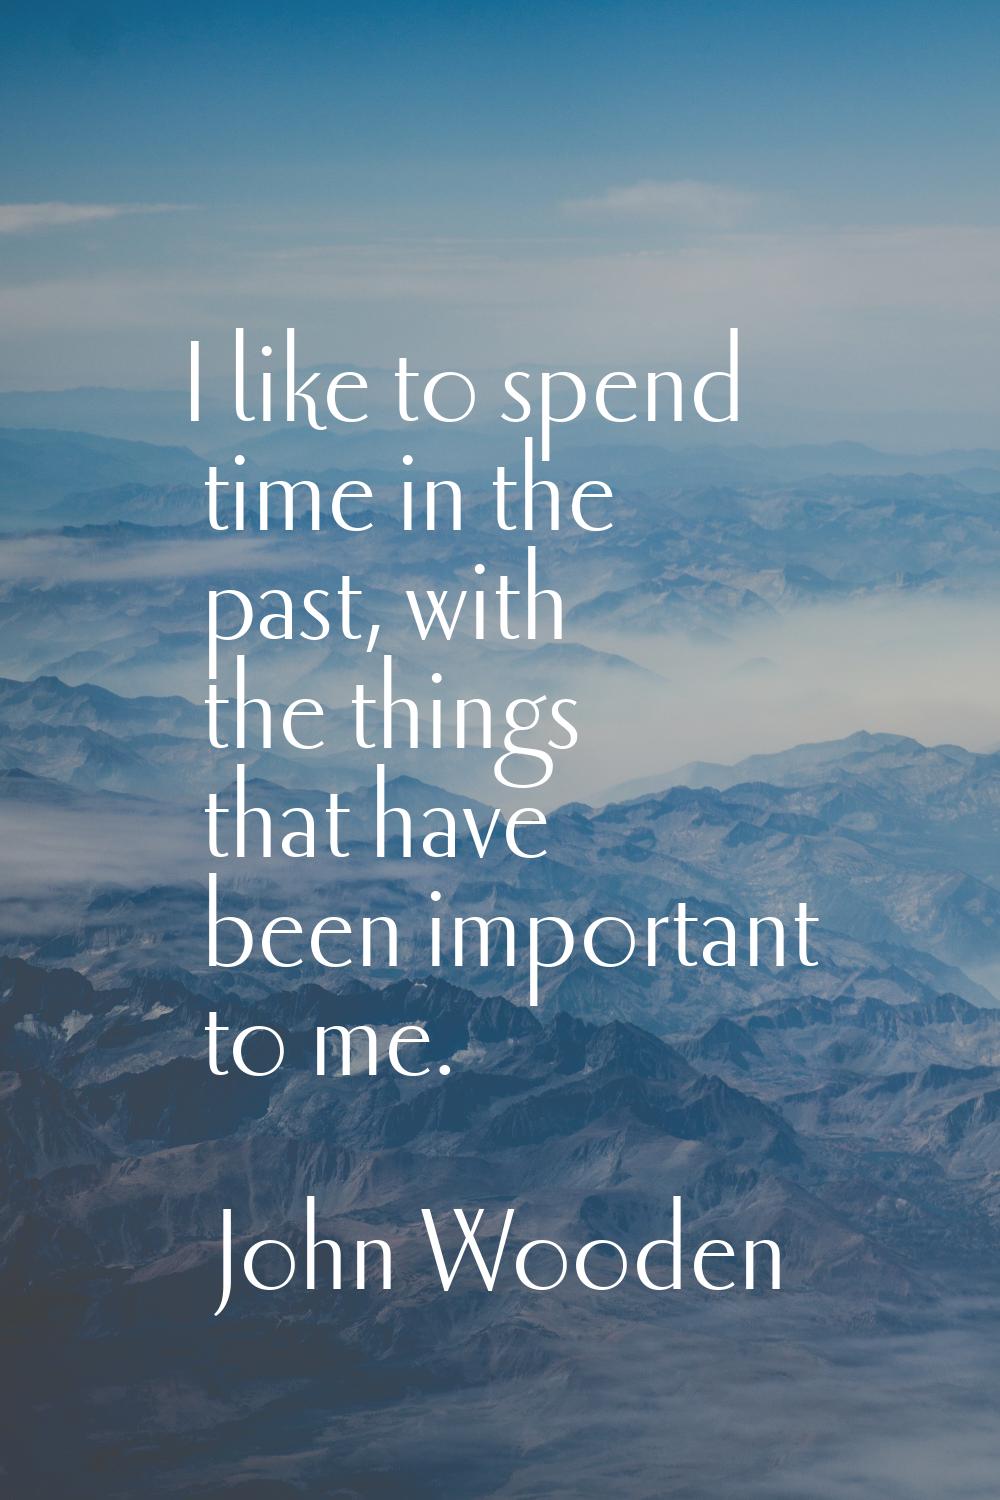 I like to spend time in the past, with the things that have been important to me.